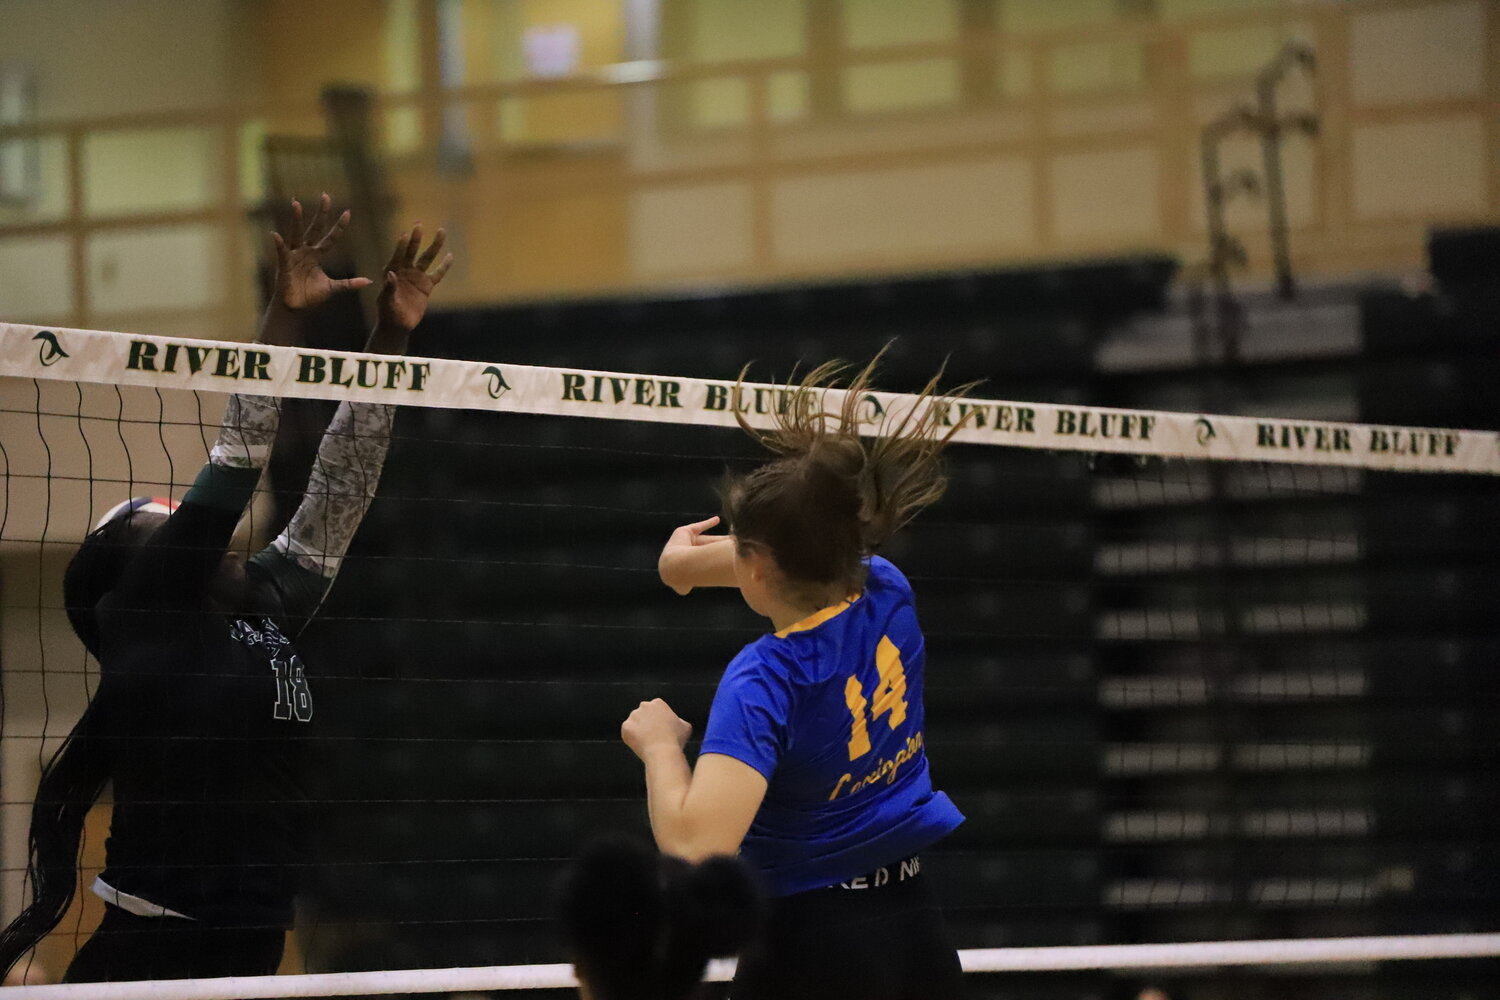 Lexington's Kaitlyn Cannon makes a play at the net during Lexington's big win over River Bluff.